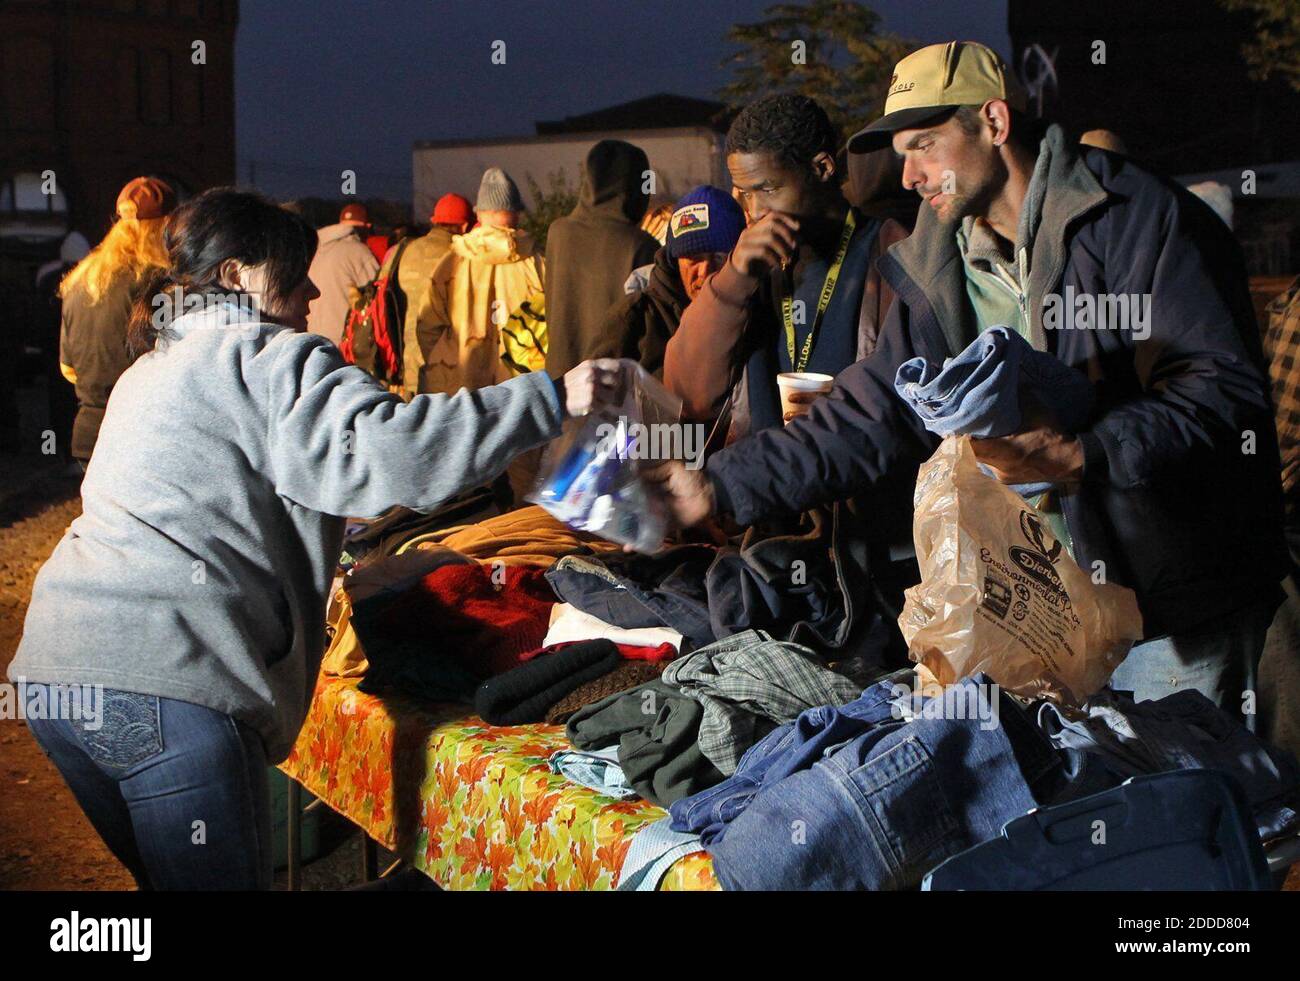 NO FILM, NO VIDEO, NO TV, NO DOCUMENTARY - Volunteer Jackie Peck, left, hands out clothing to homeless men, Oct. 21, 2013, near the St. Louis riverfront. Photo by J.B. Forbes/St. Louis Post-Dispatch/MCT/ABACAPRESS.COM Stock Photo